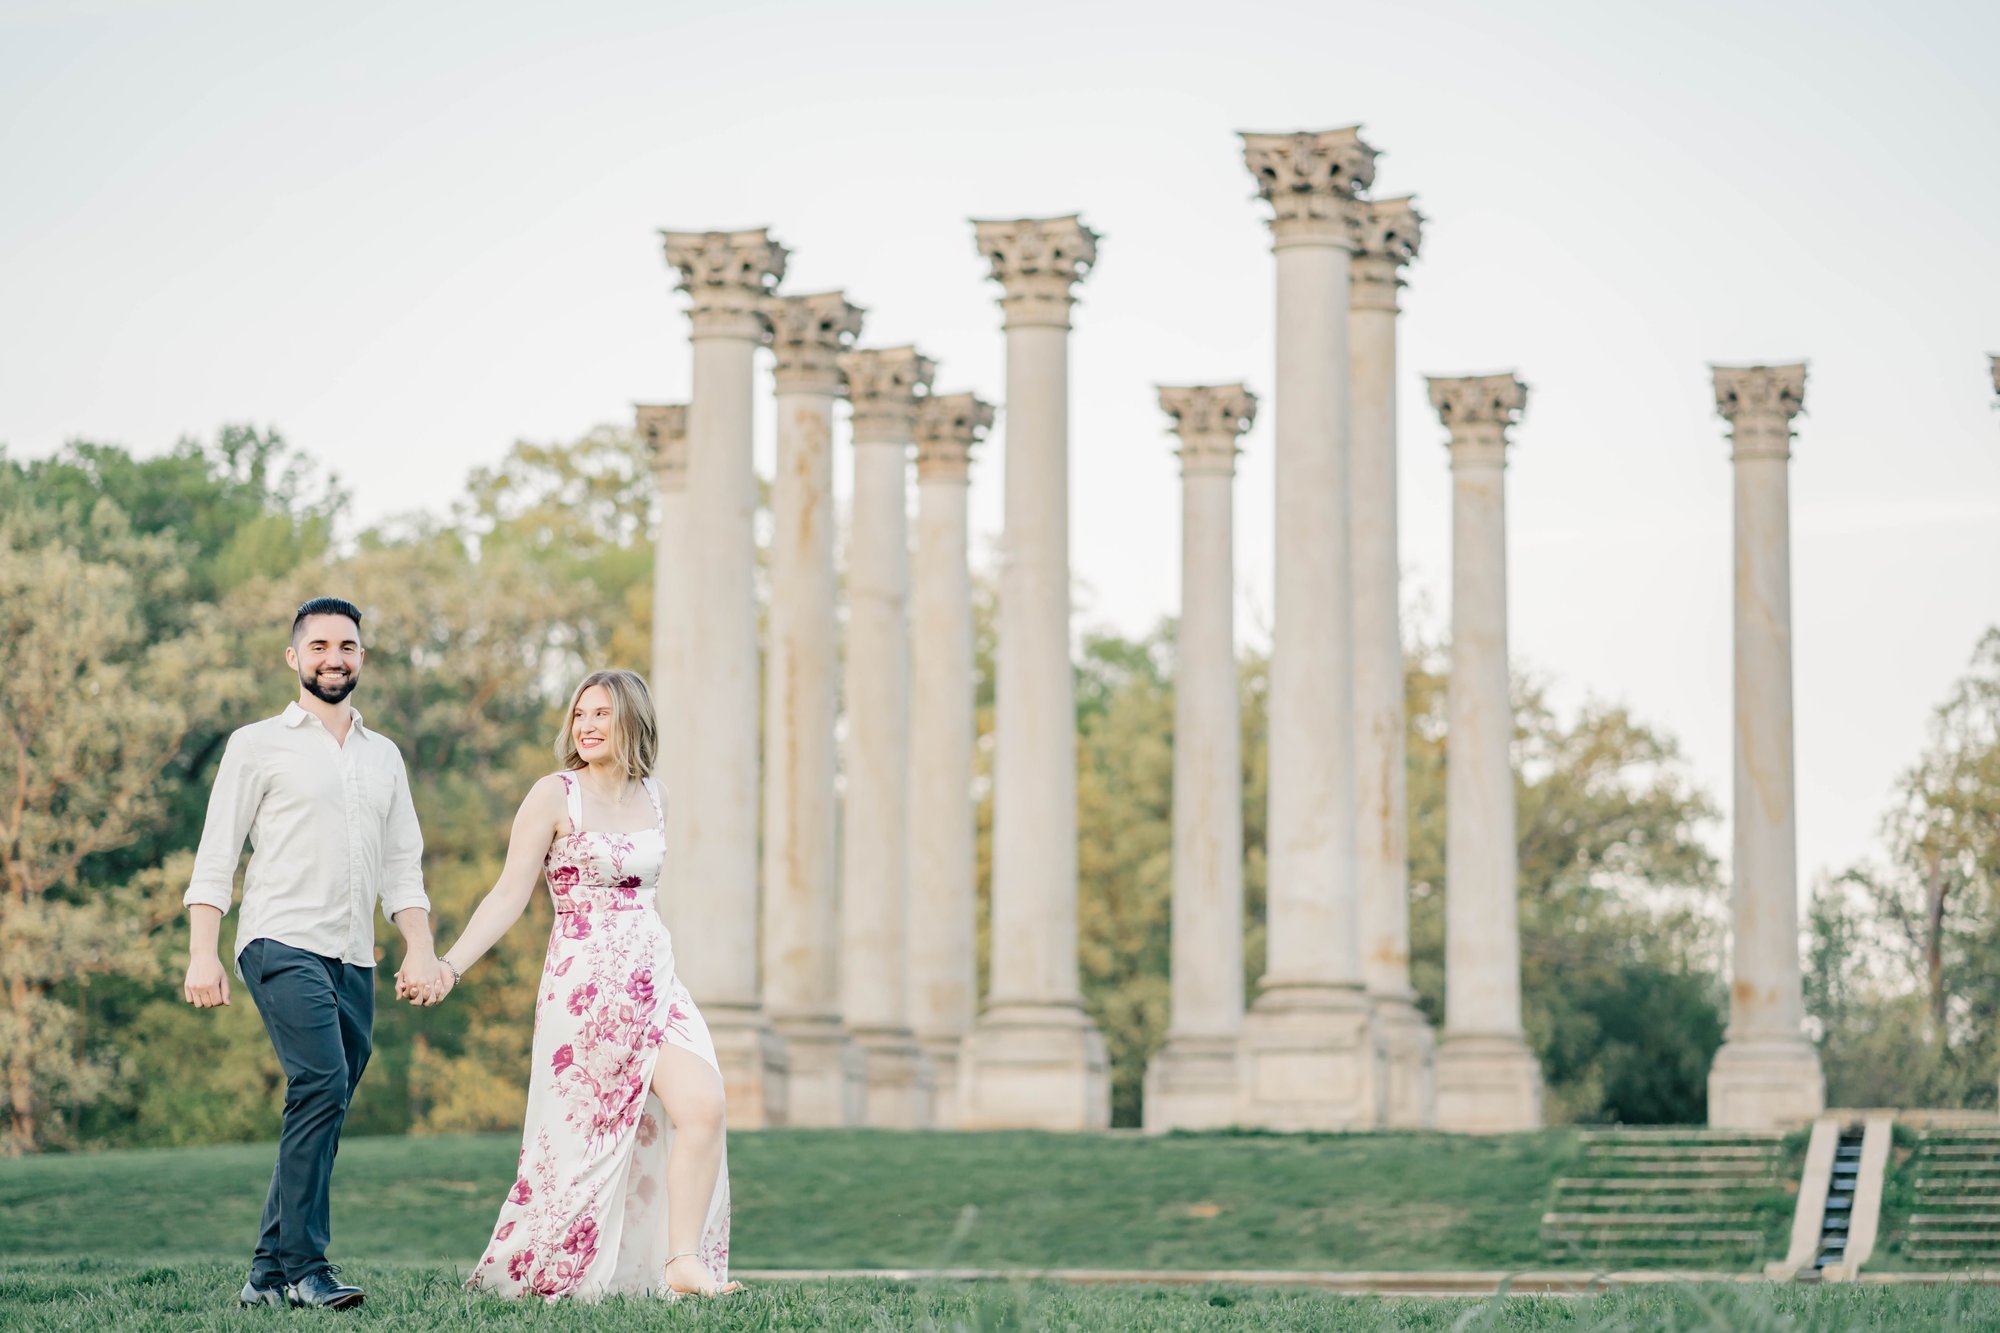 Engagement photo session of an engaged couple at the National Arboretum in Washington DC captured by Stephanie Grooms Artistry